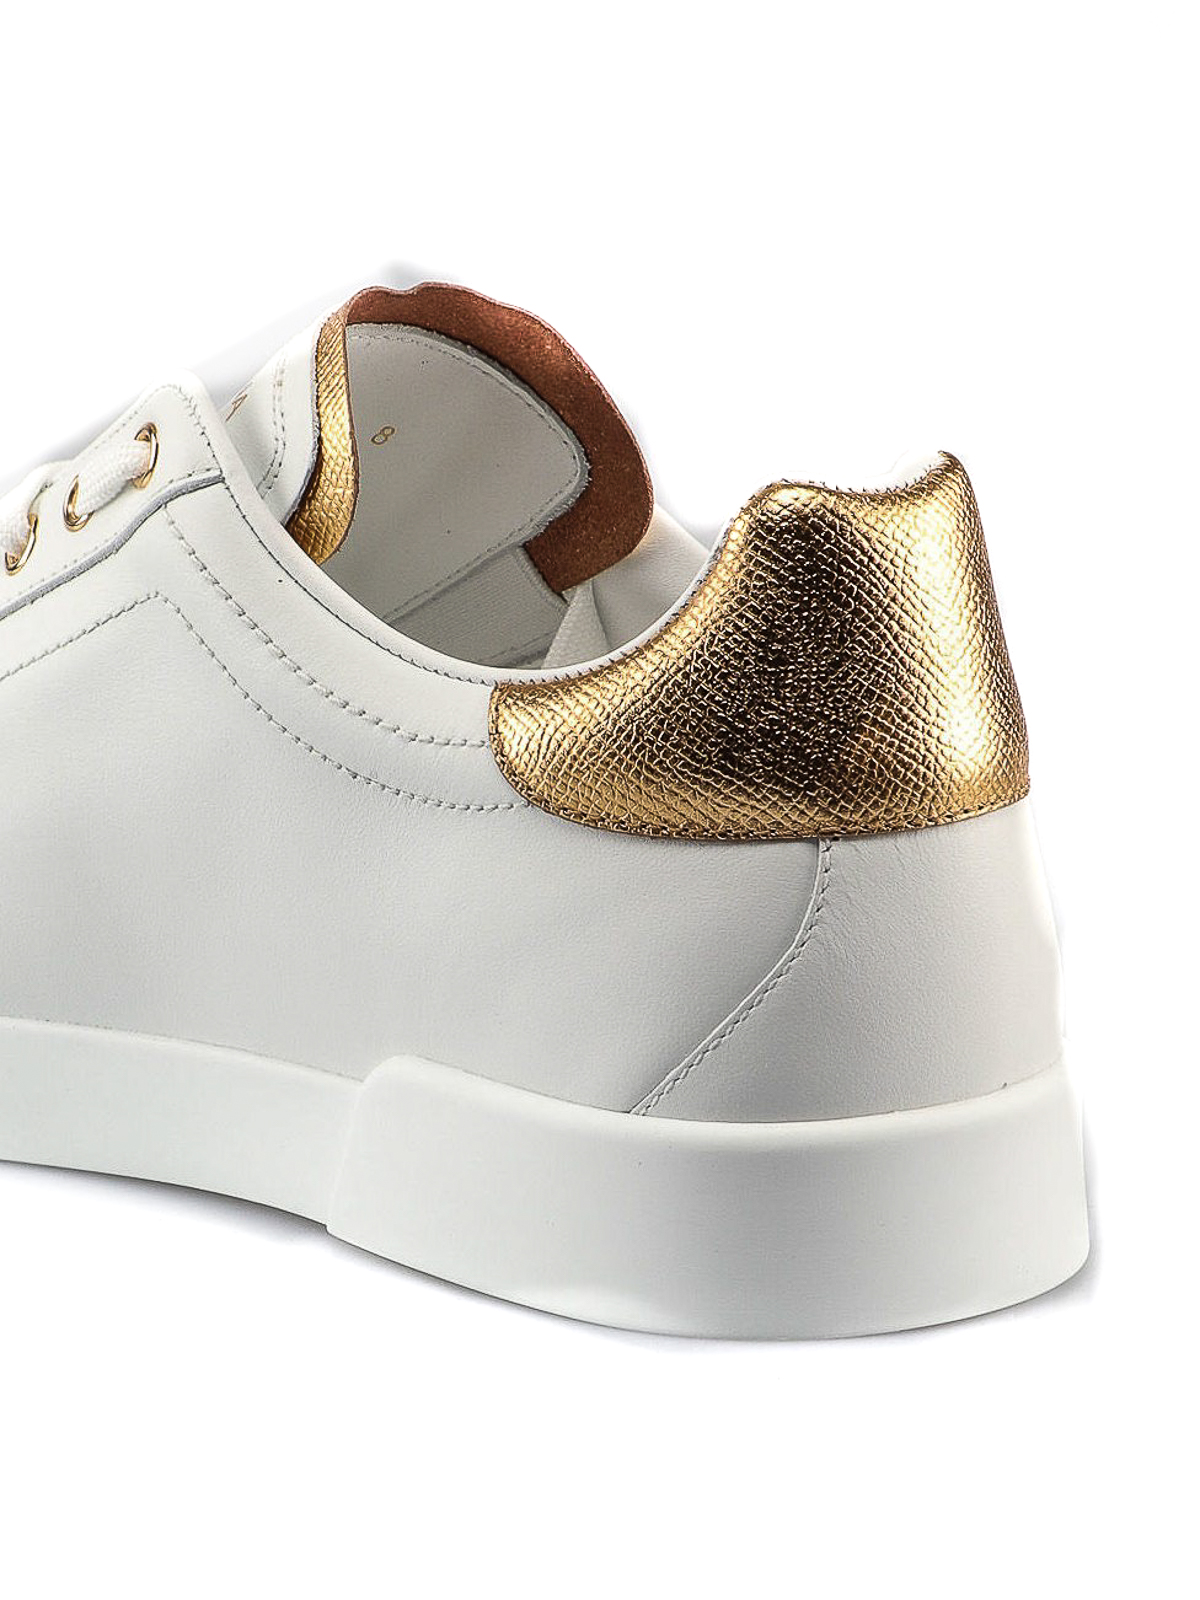 dolce gabbana gold sneakers